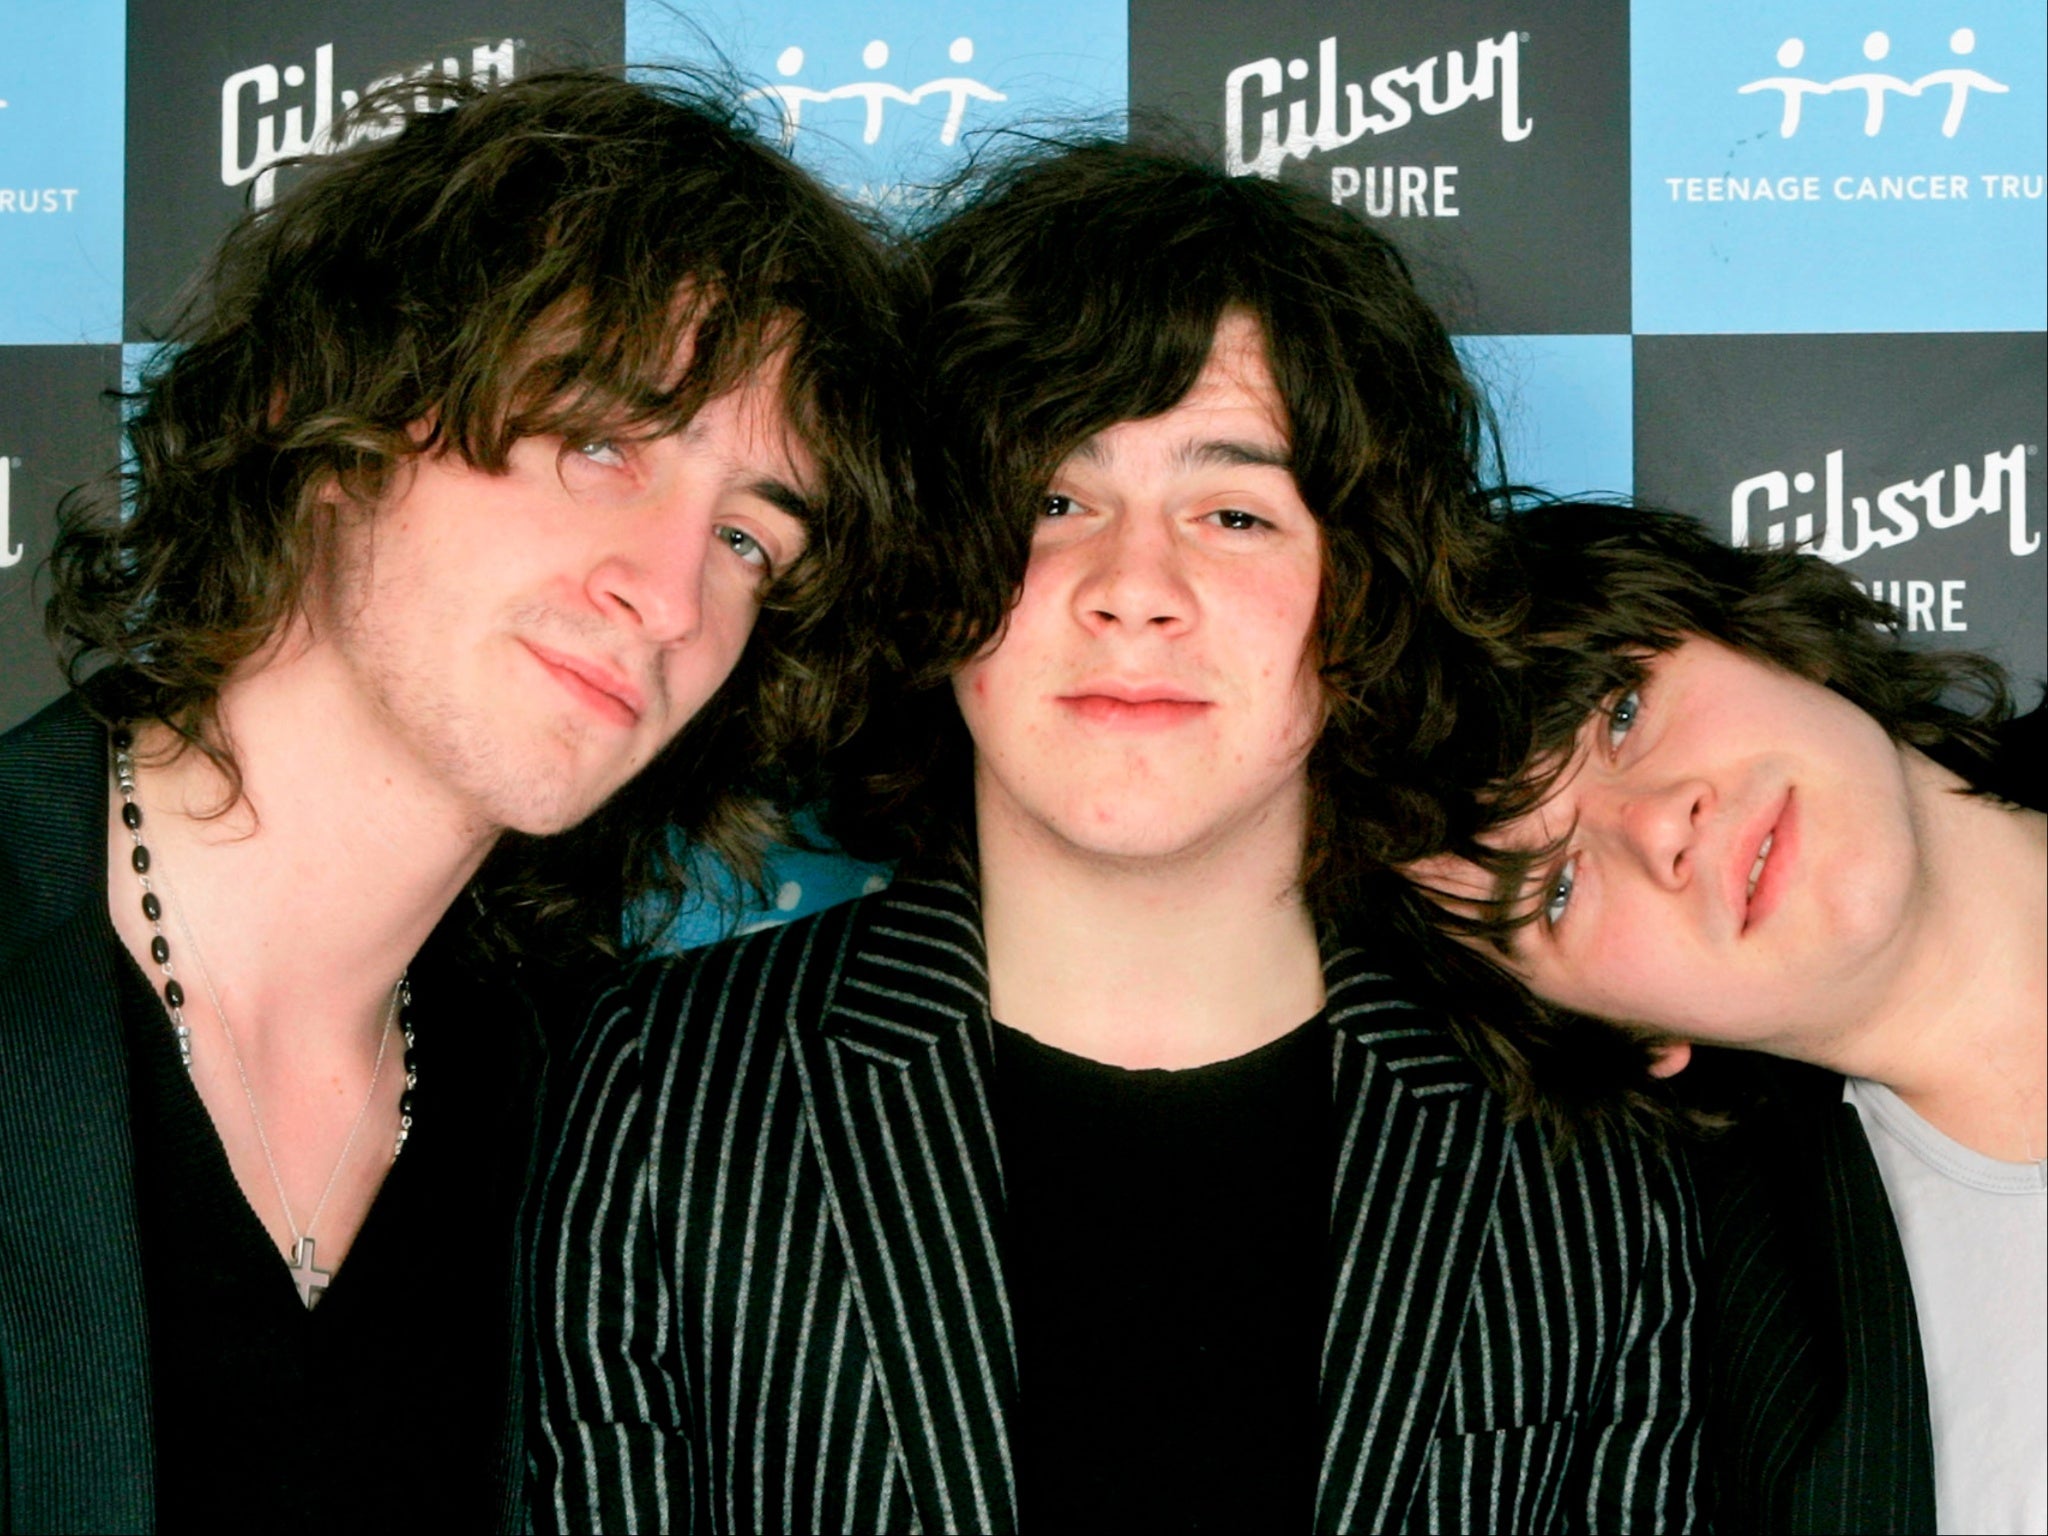 Peter Reilly, Kyle Falconer, Kieren Webster pictured in 2007